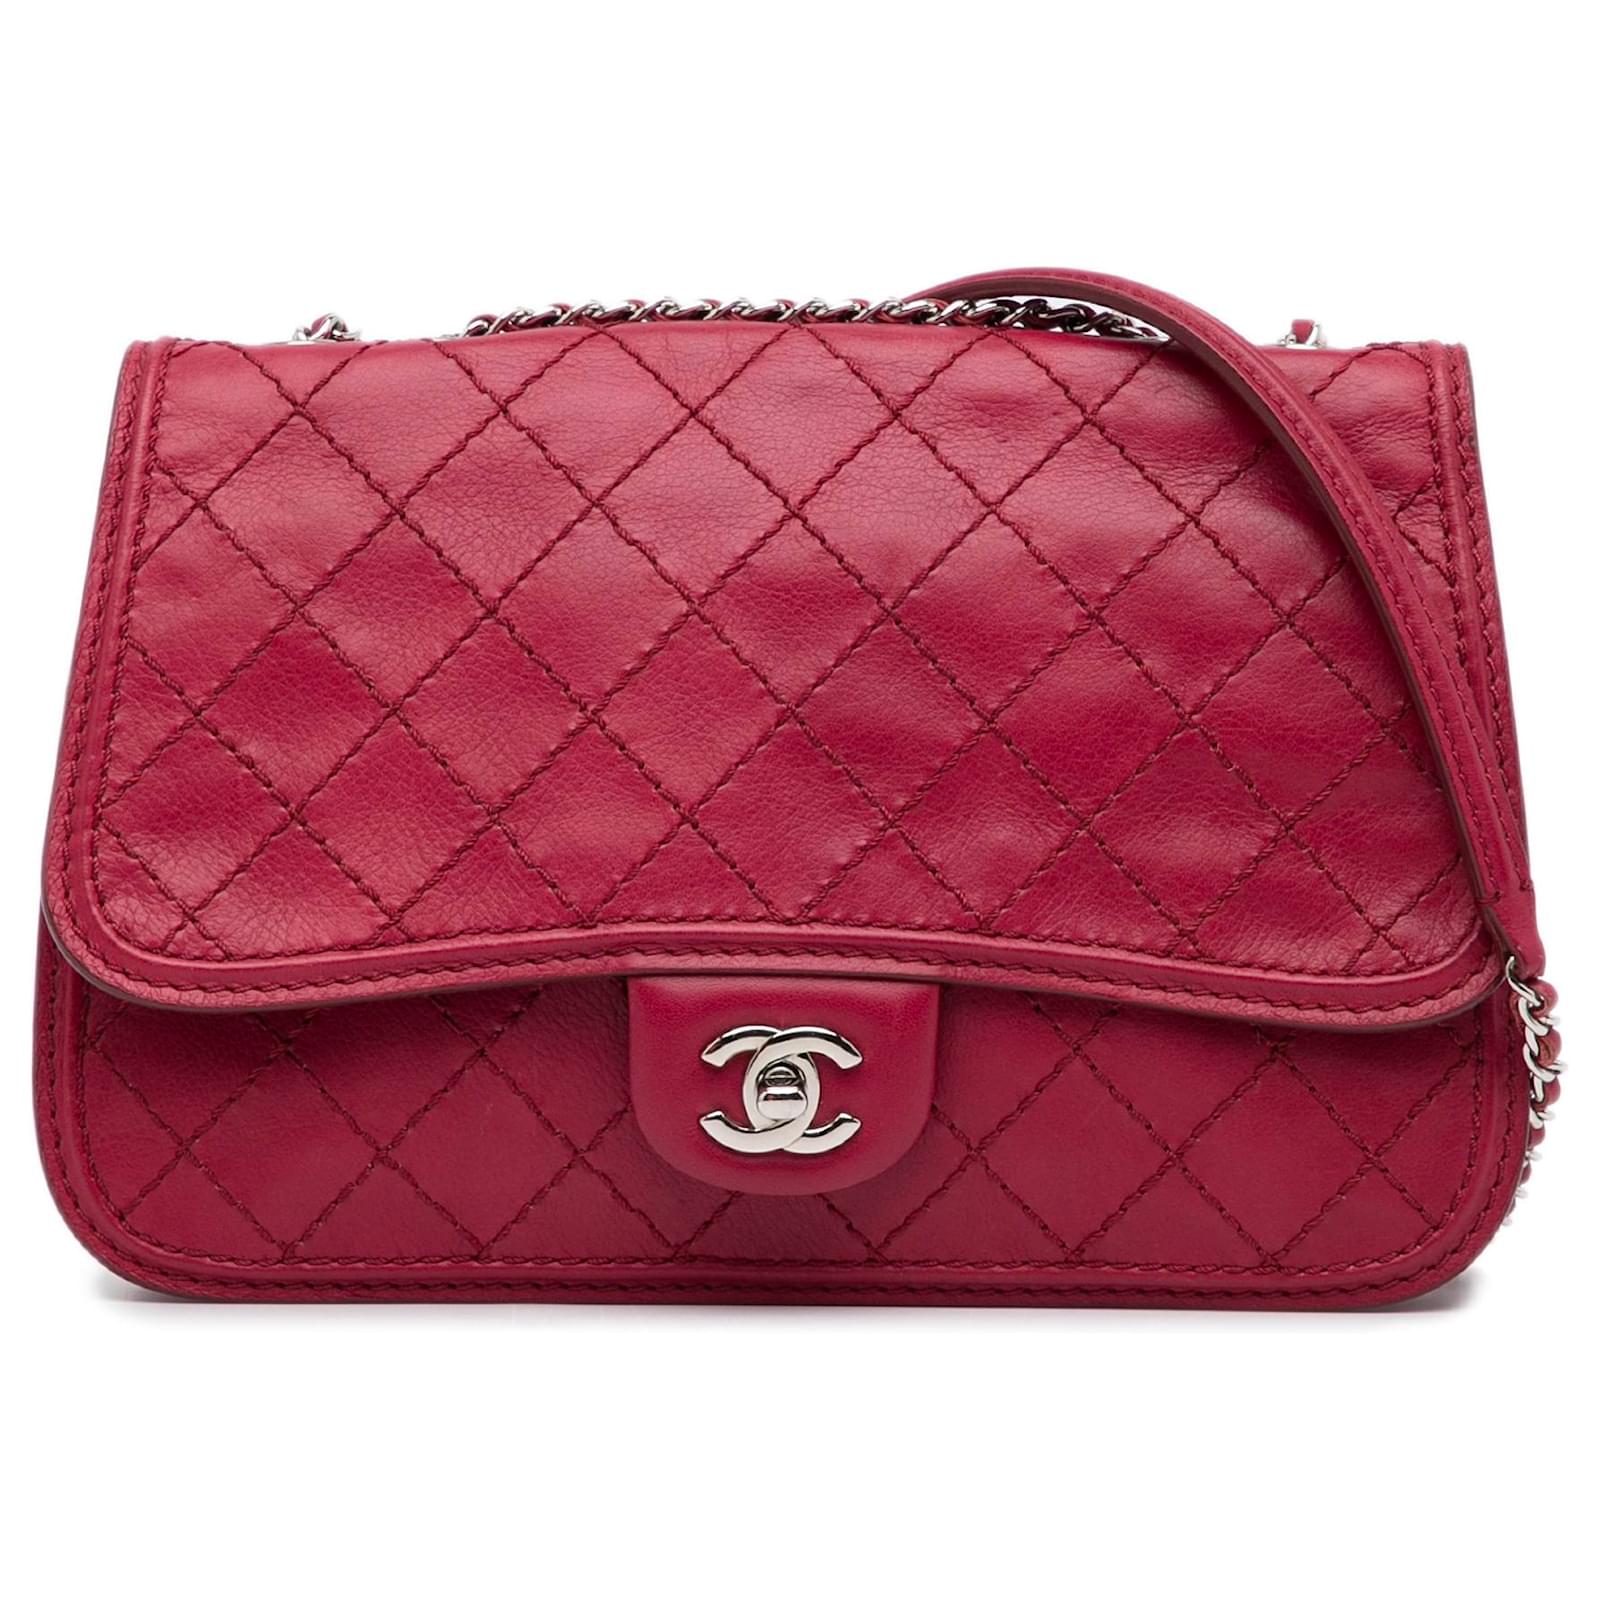 Chanel French Riviera Flap Bag in Red